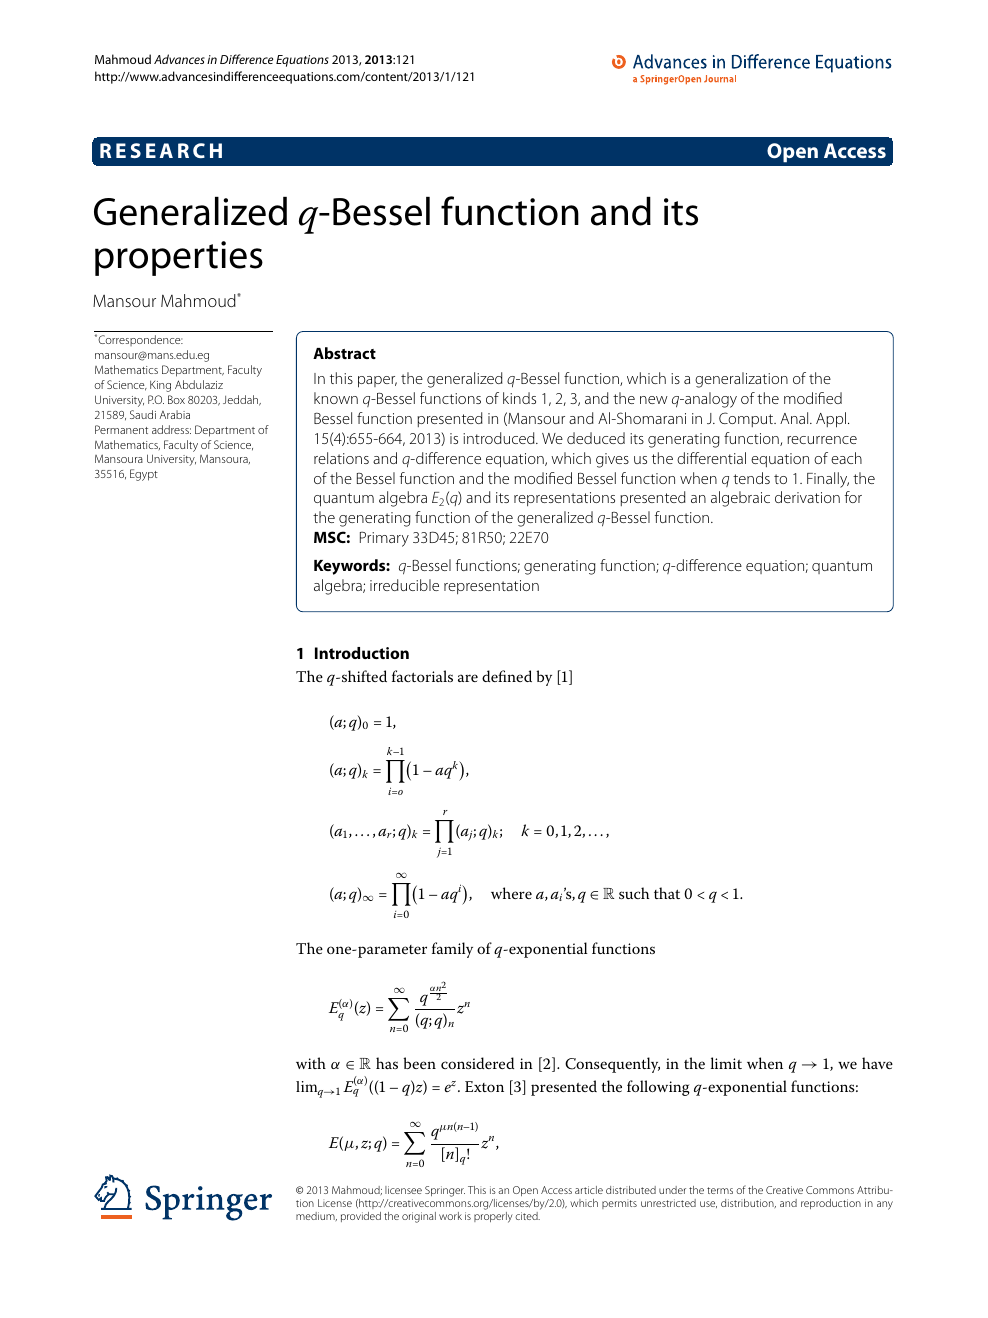 Generalized Q Bessel Function And Its Properties Topic Of Research Paper In Mathematics Download Scholarly Article Pdf And Read For Free On Cyberleninka Open Science Hub